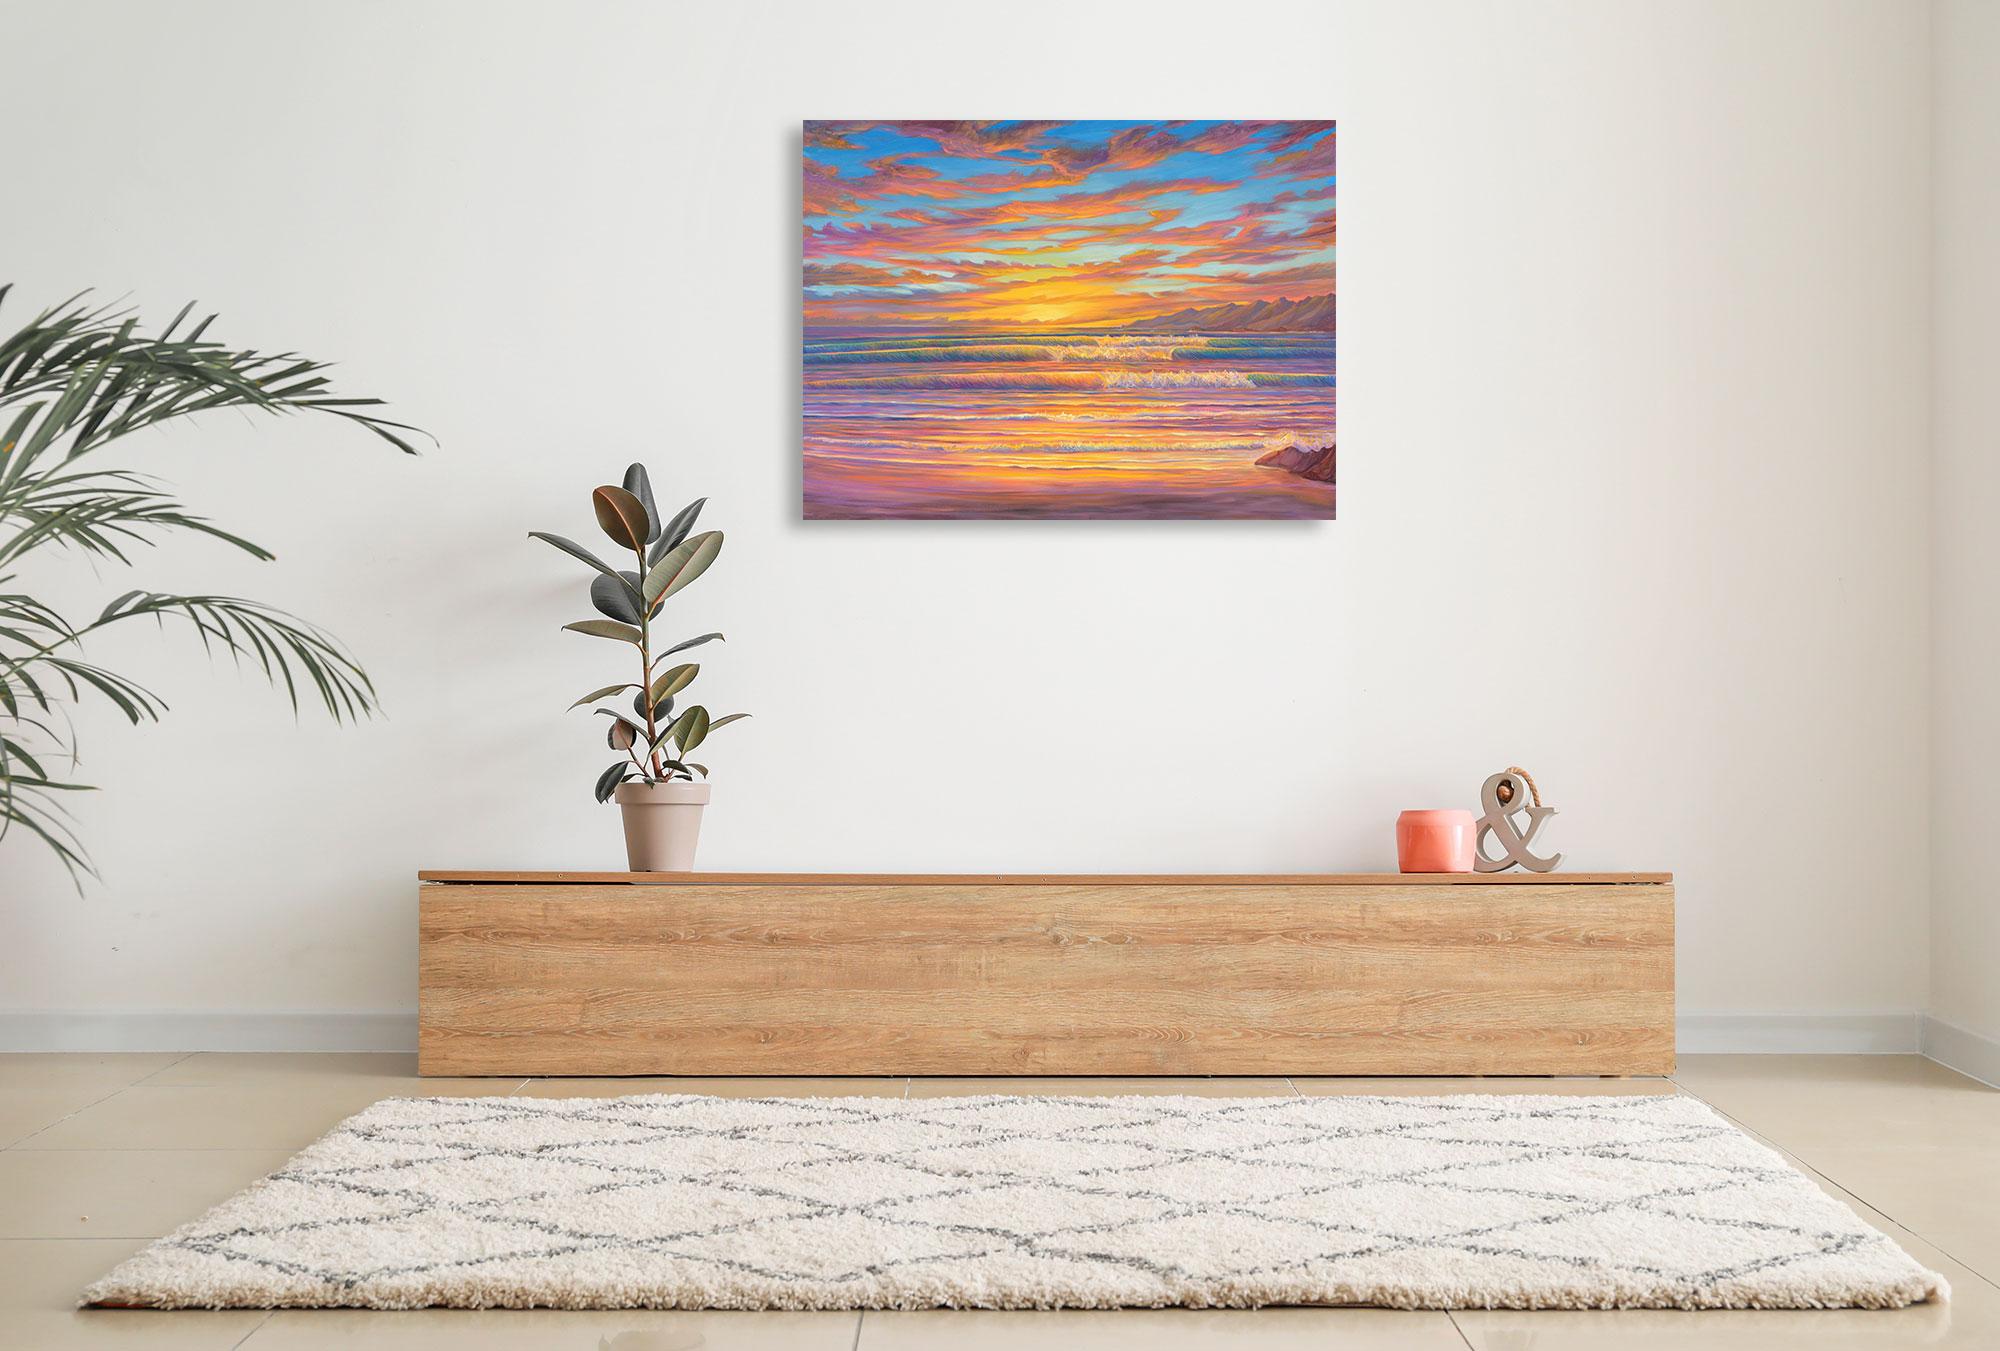 Sunset Surf Glow - Oil On Canvas - Landscape Painting By Dante Rondo For Sale 1